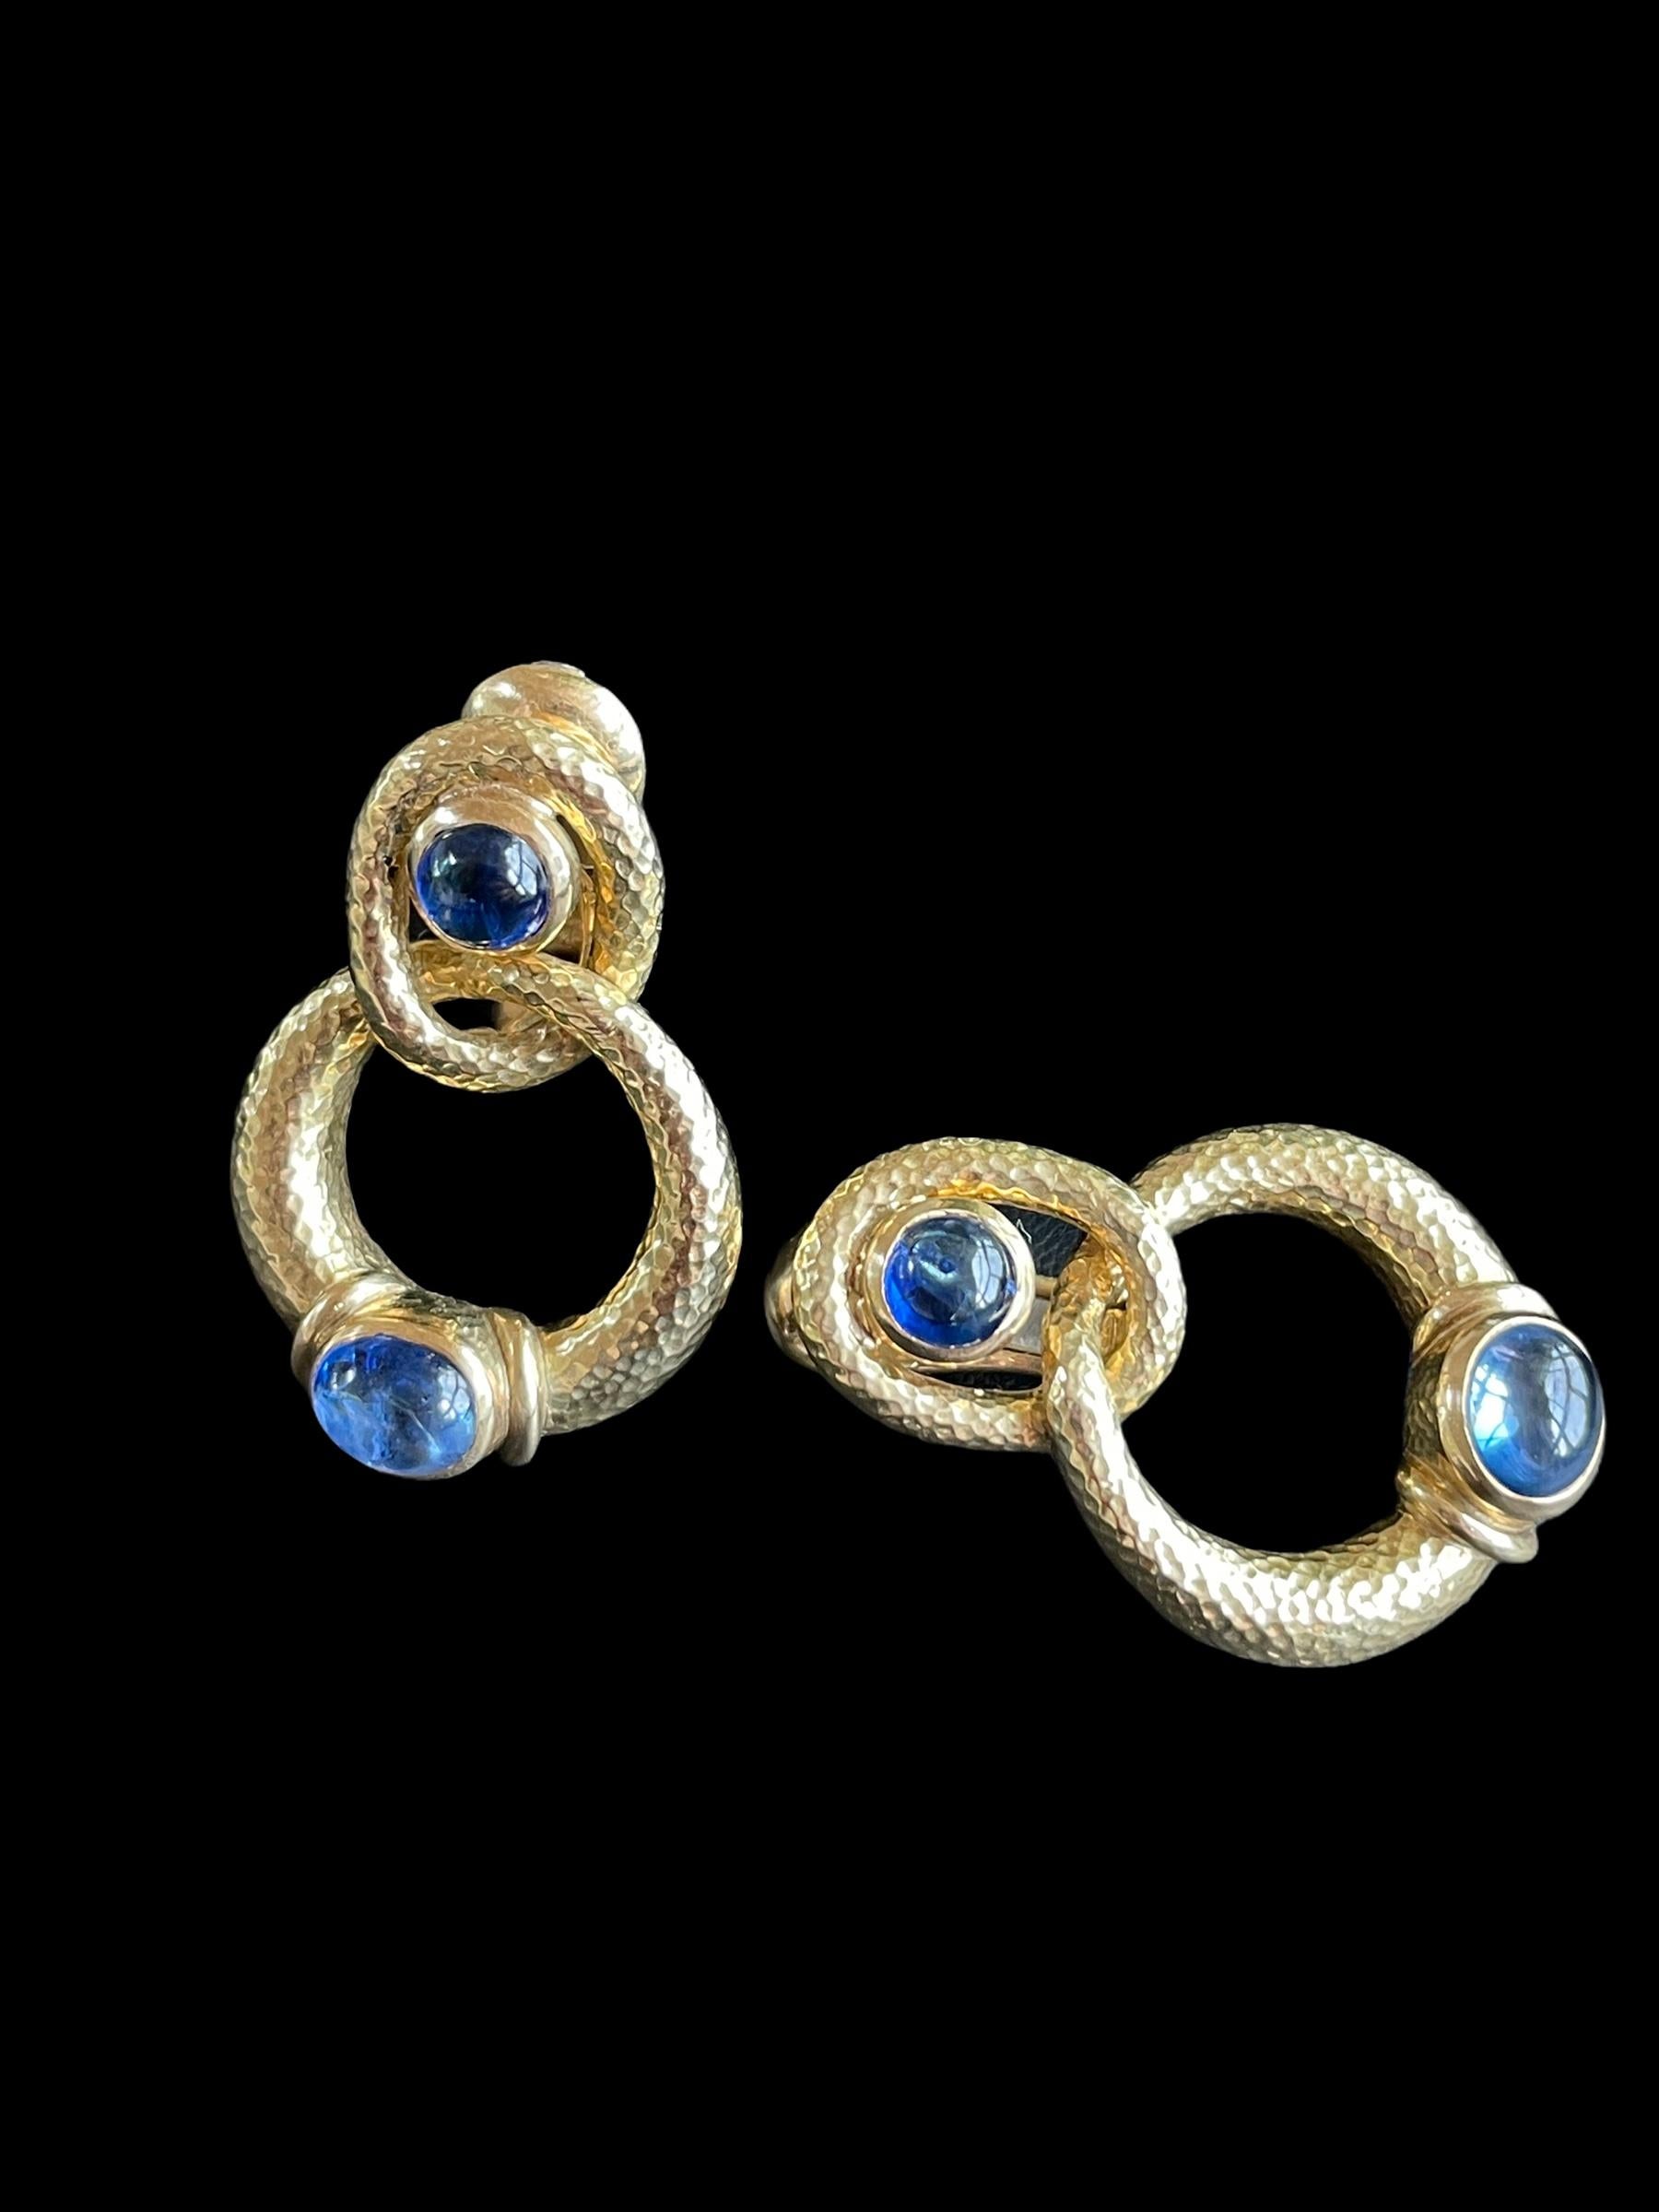 Classic wearable David Webb double hoop earrings accented with a cabochon sapphire. Each earring as a post with omega back. Very comfortable and easy to wear with any outfit.

Stamped Webb 18k
